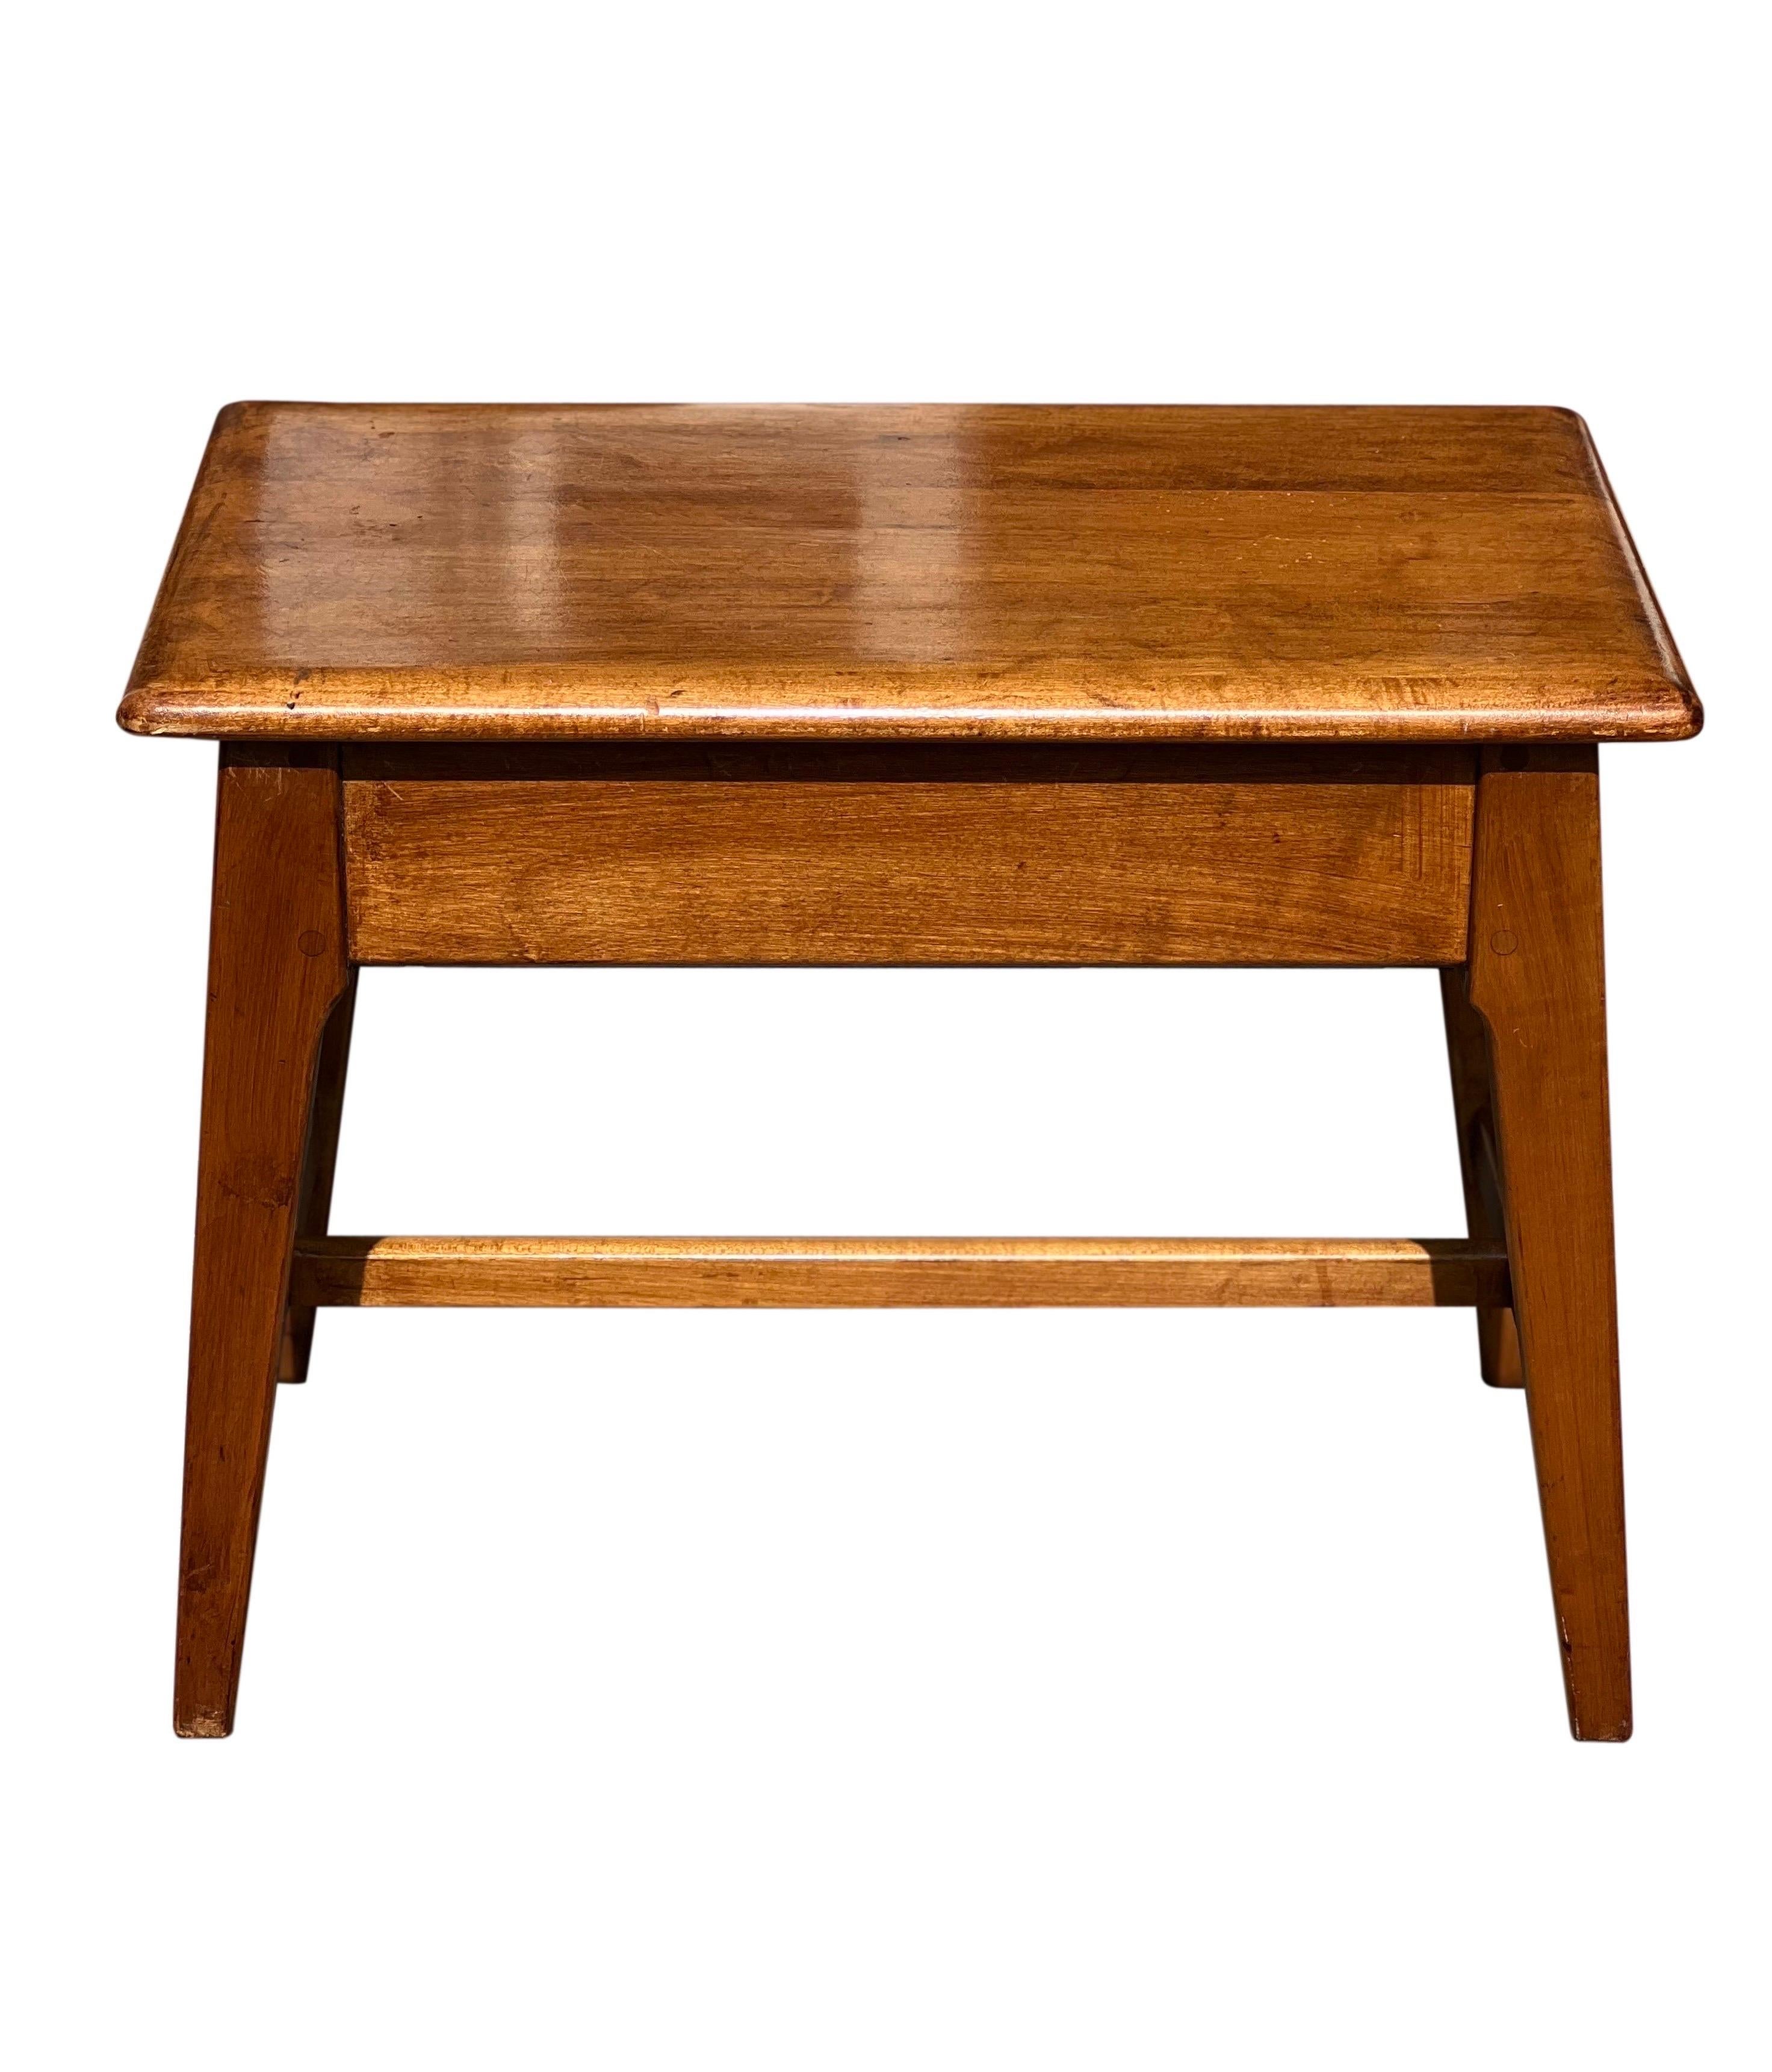 Midcentury Italian Oak Sewing Table or Stool with Single Drawer In Good Condition For Sale In Doylestown, PA